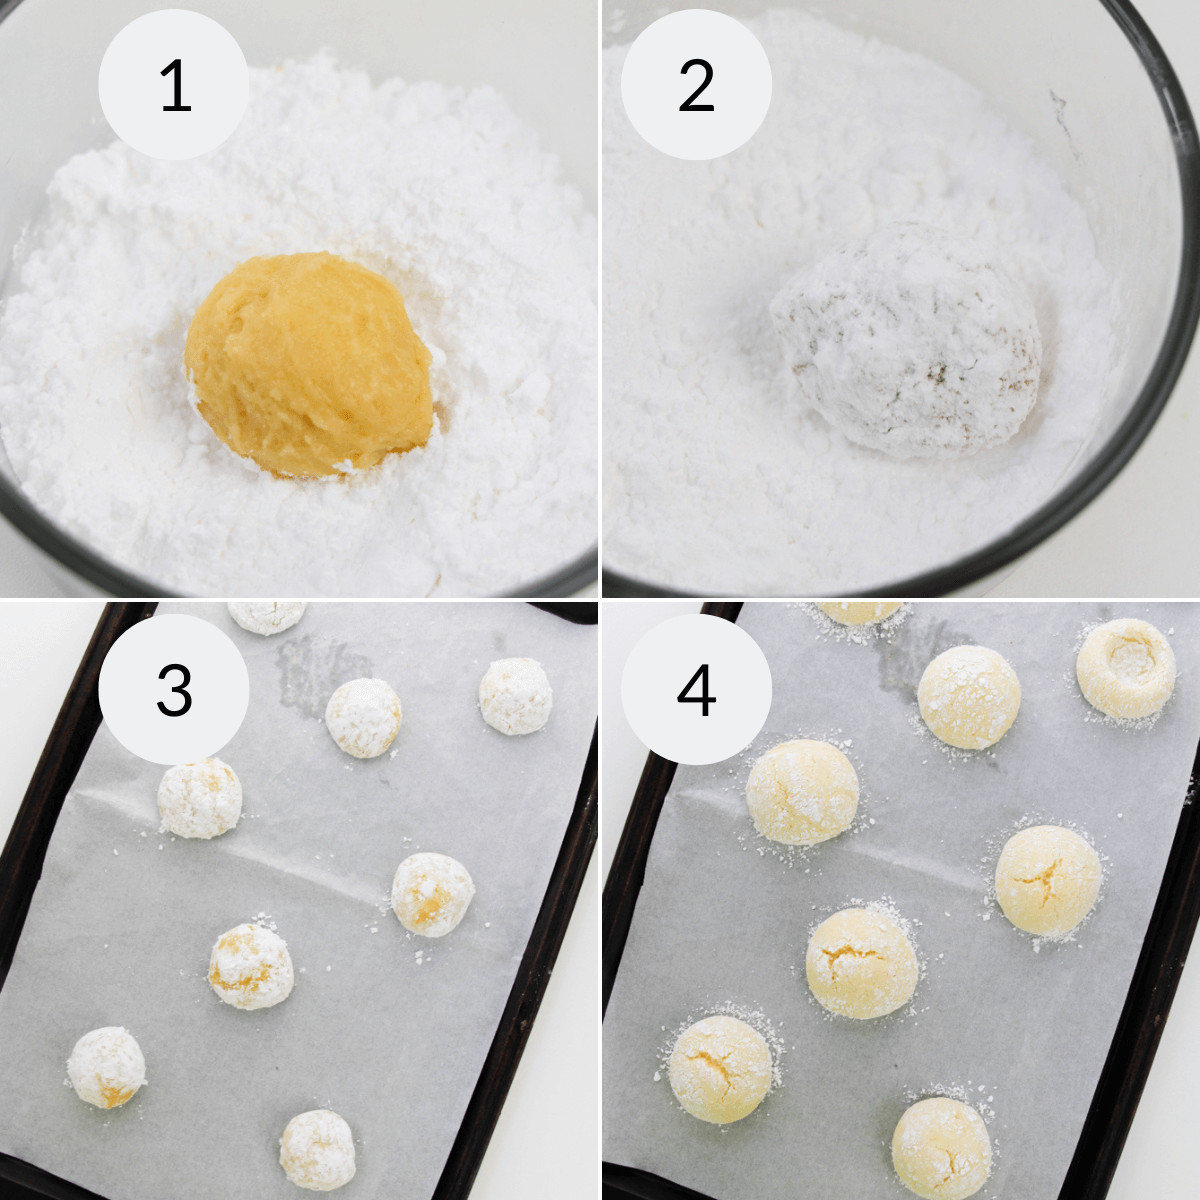 Roll the dough balls in powder sugar and placing them on parchment lined trays.